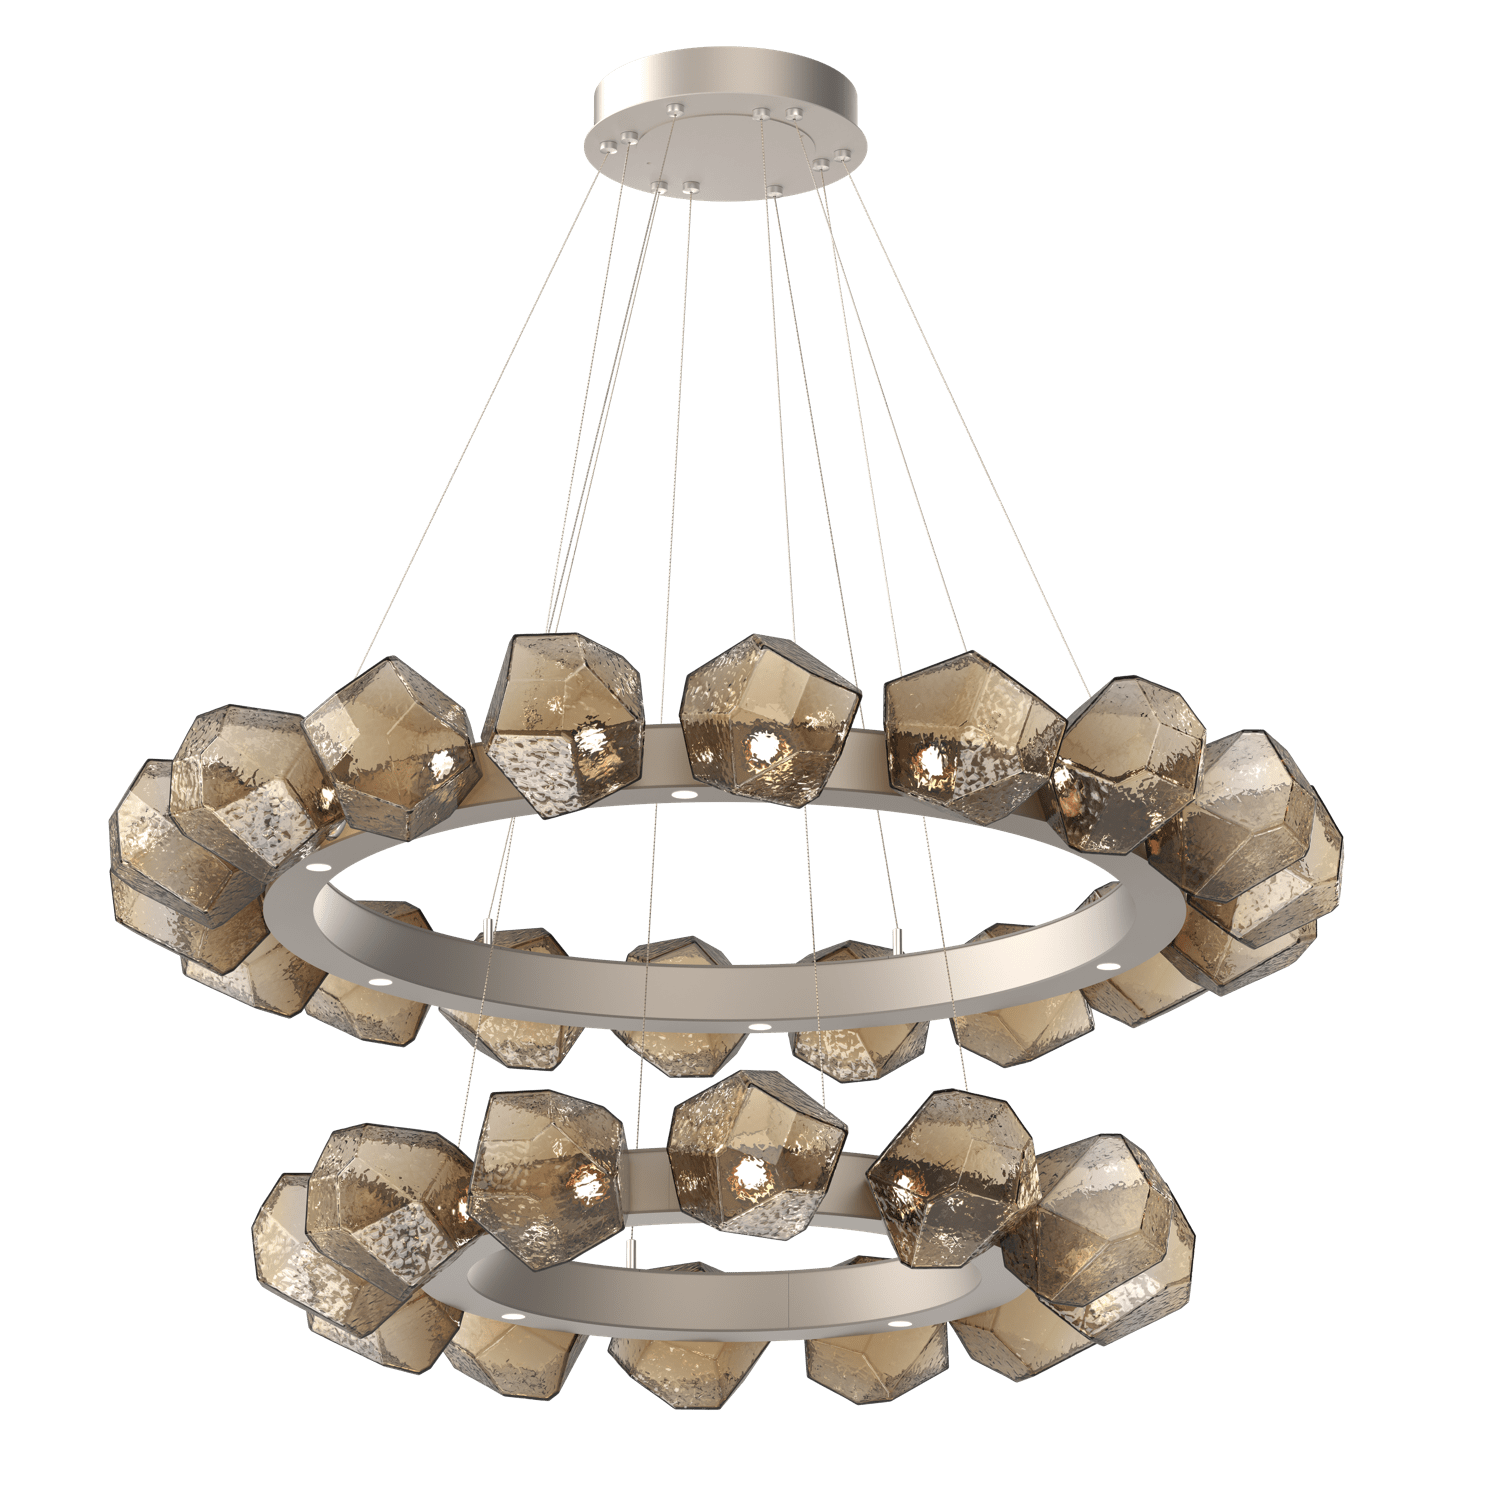 CHB0039-2T-BS-B-Hammerton-Studio-Gem-48-inch-two-tier-radial-ring-chandelier-with-metallic-beige-silver-finish-and-bronze-blown-glass-shades-and-LED-lamping